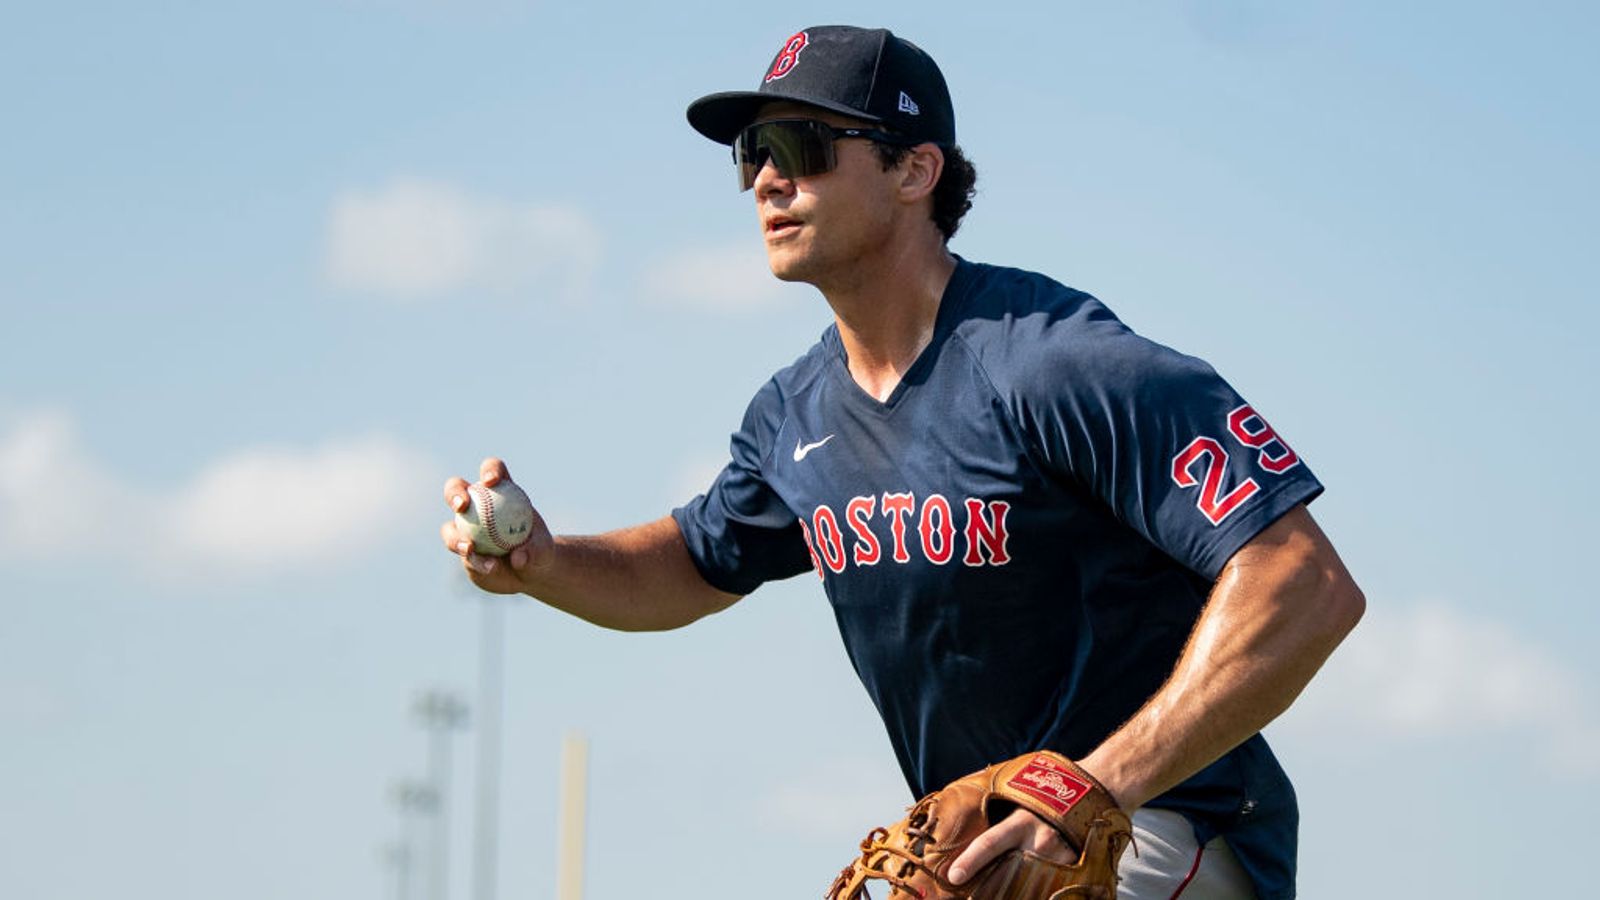 Wednesday's Red Sox spring training report: Bobby Dalbec keeps